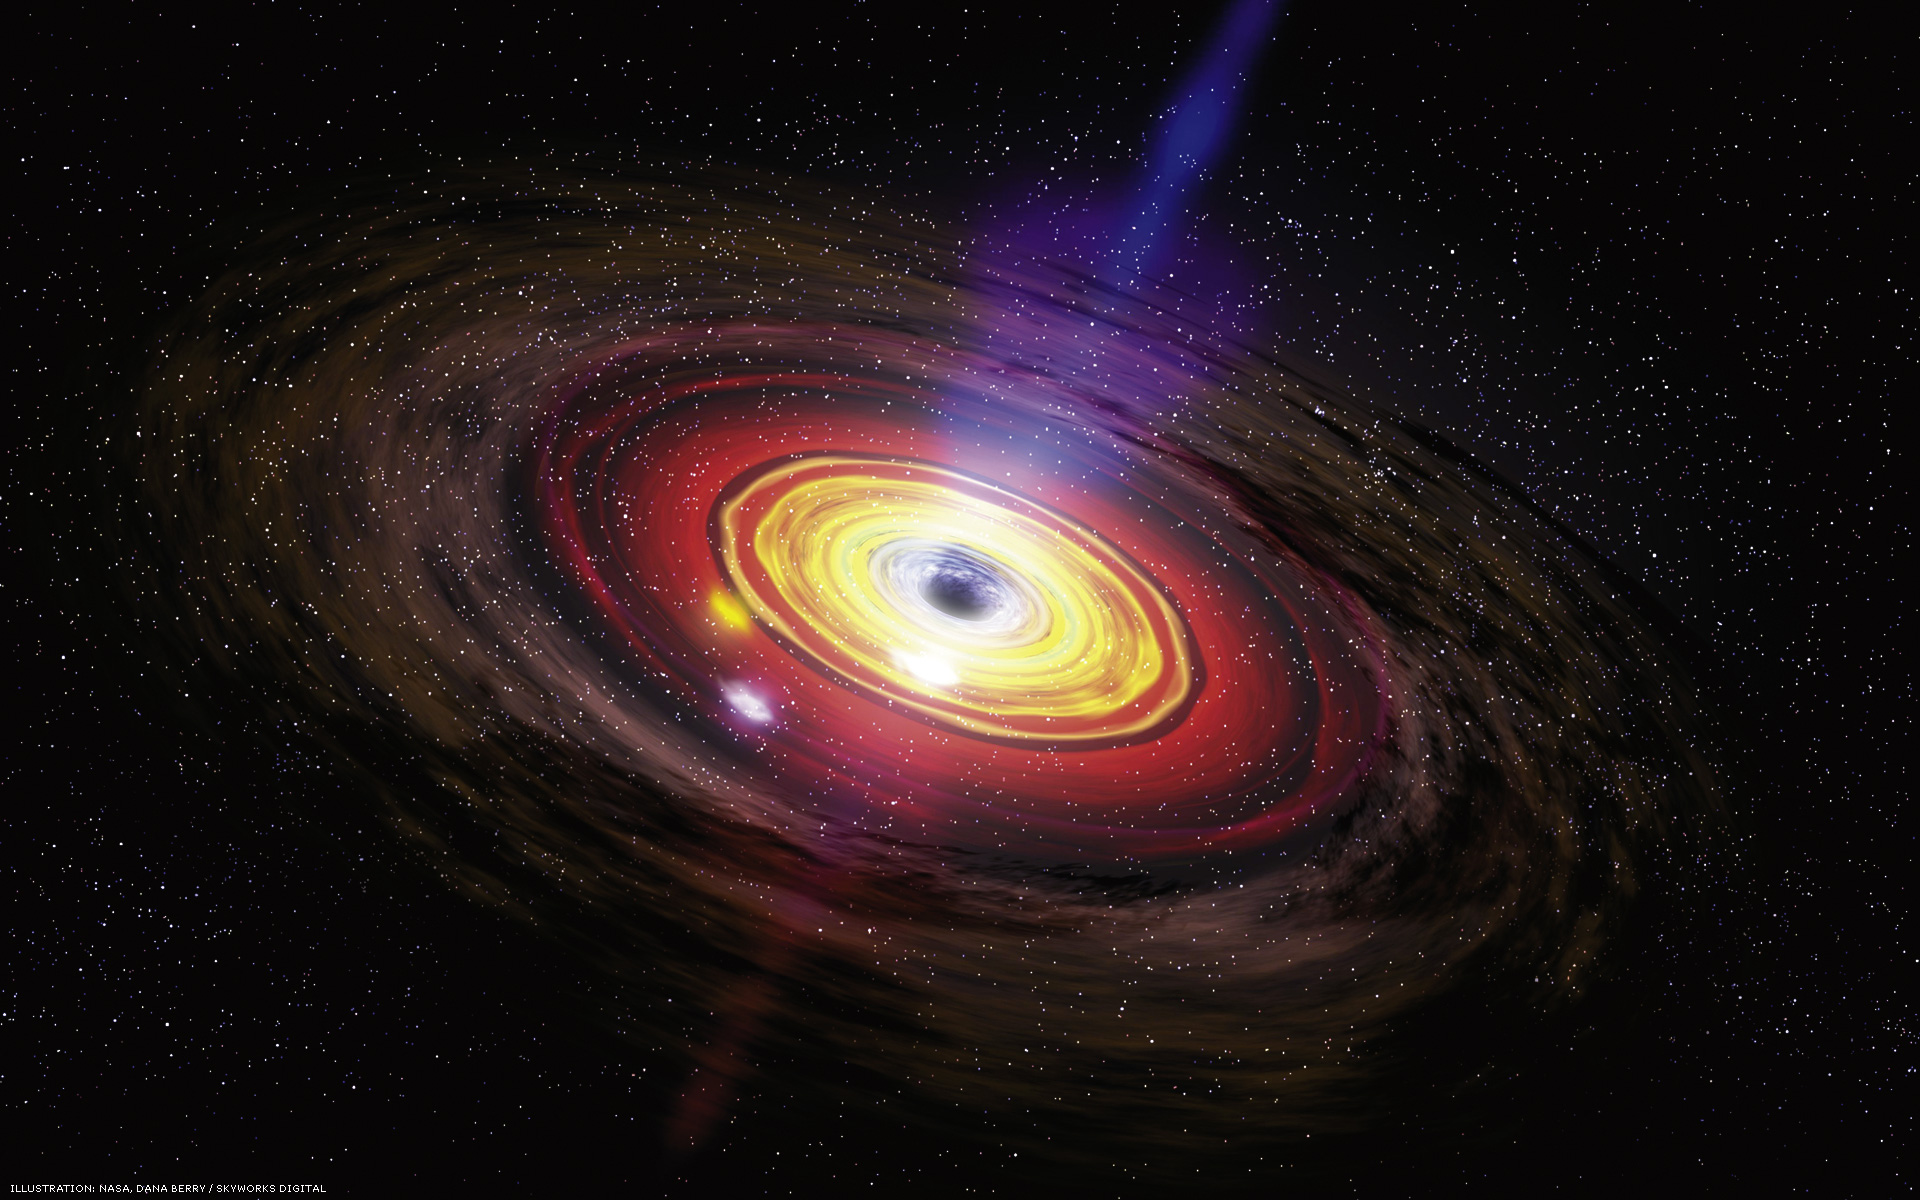 A flat, brightly coloured disk with a blue jet emerging from its centre.